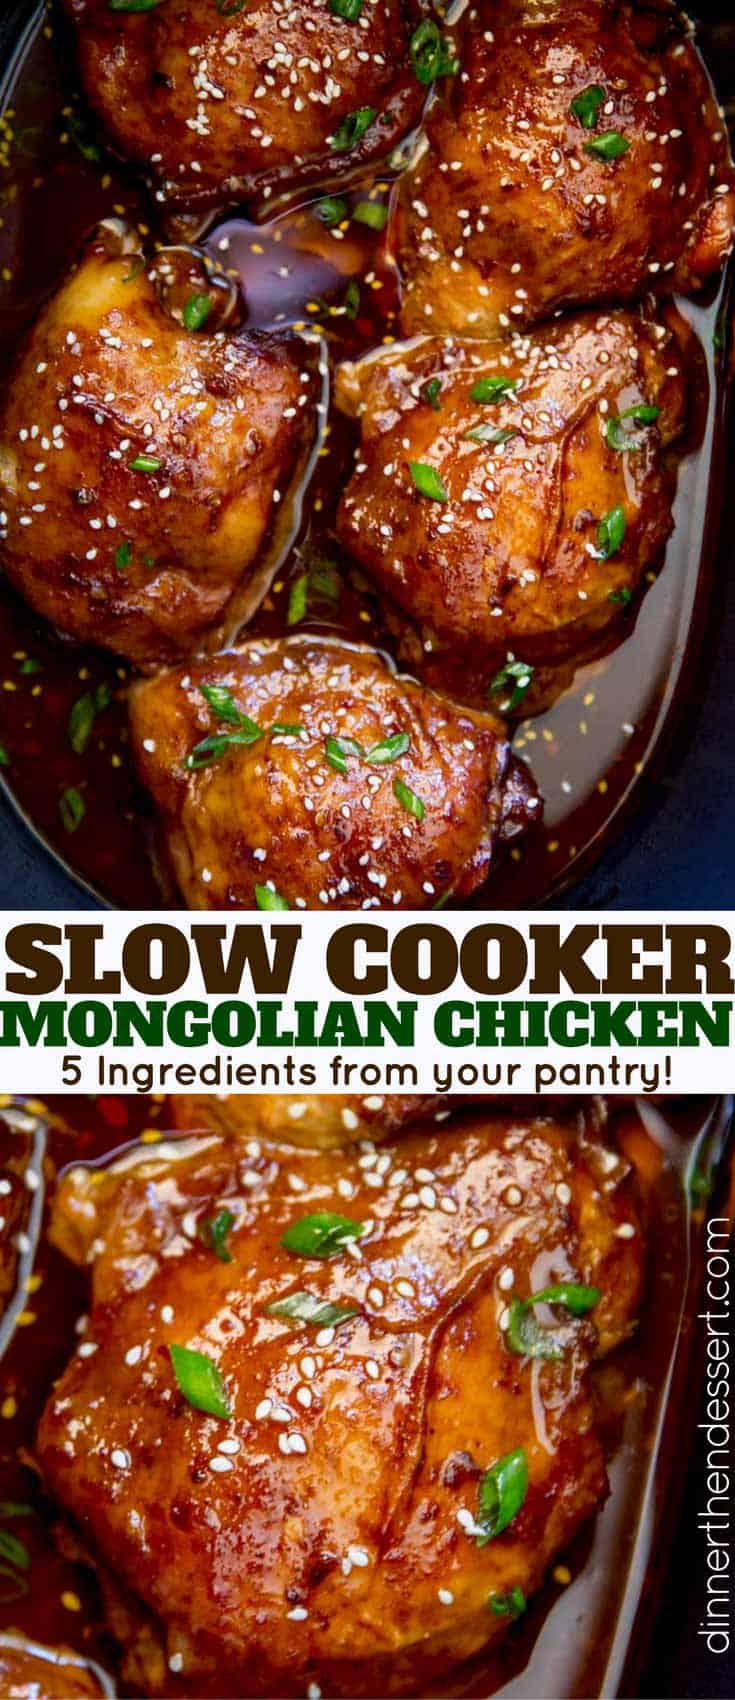 Slow Cooker Mongolian Chicken is a set it and forget it five ingredient recipe that is sweet, spicy, and full of garlic and ginger flavors!